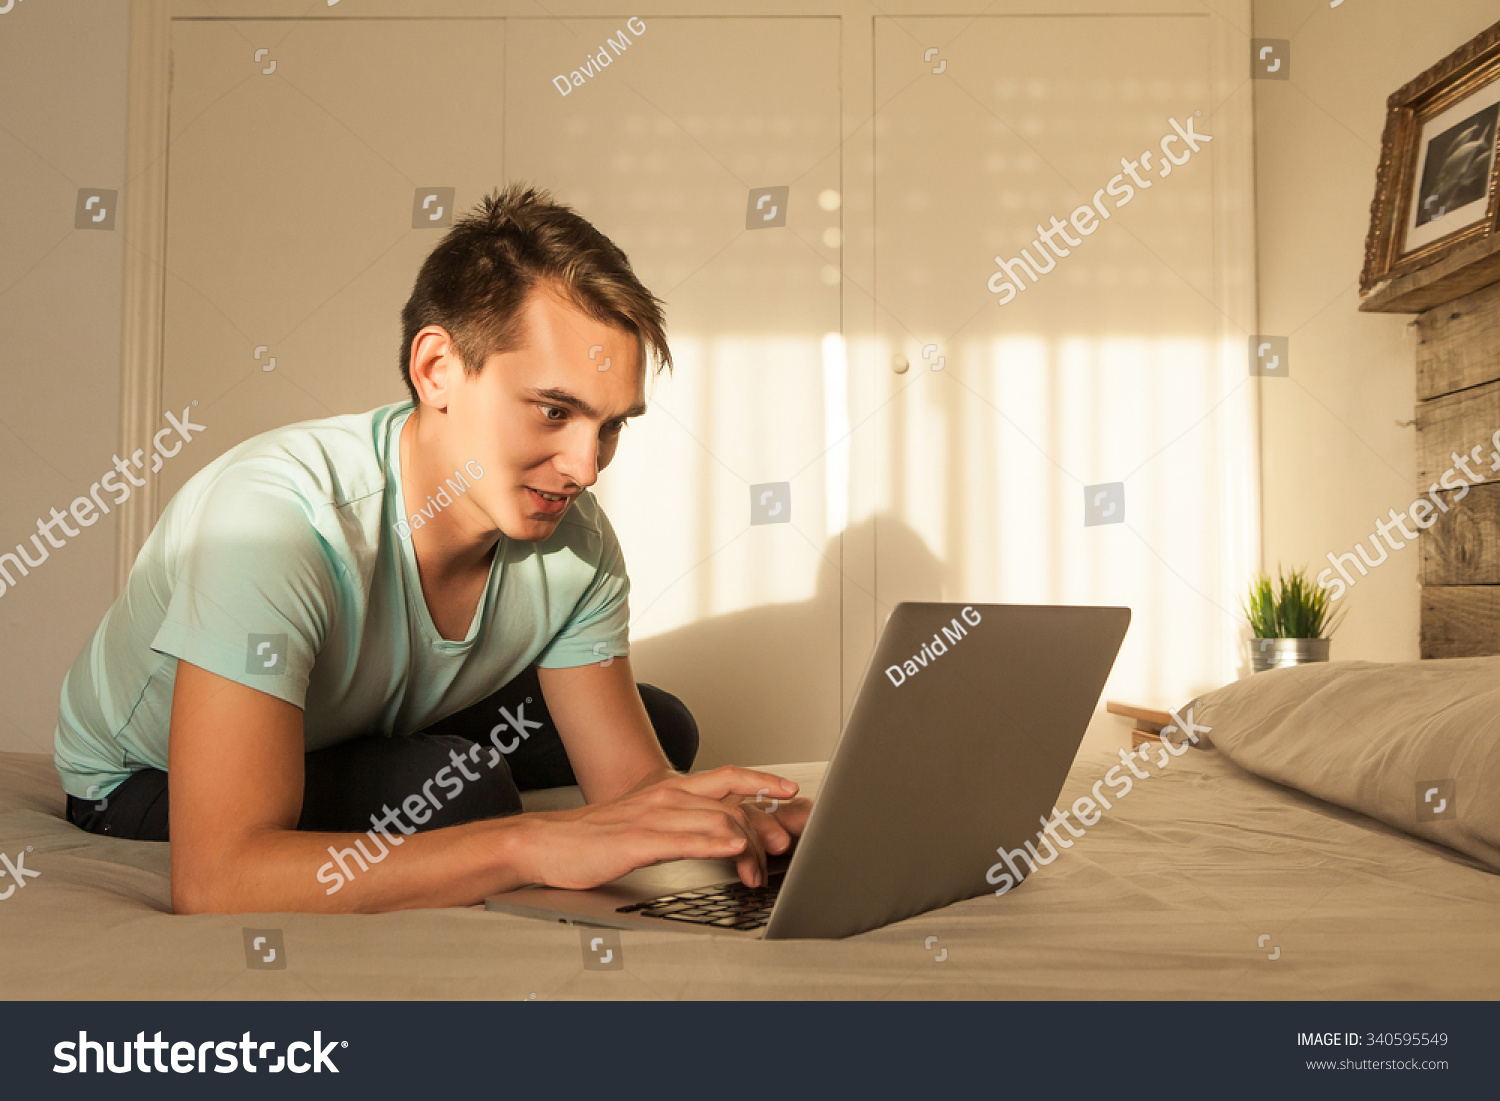 Man typing in a laptop computer while sitting in the bedroom. #340595549